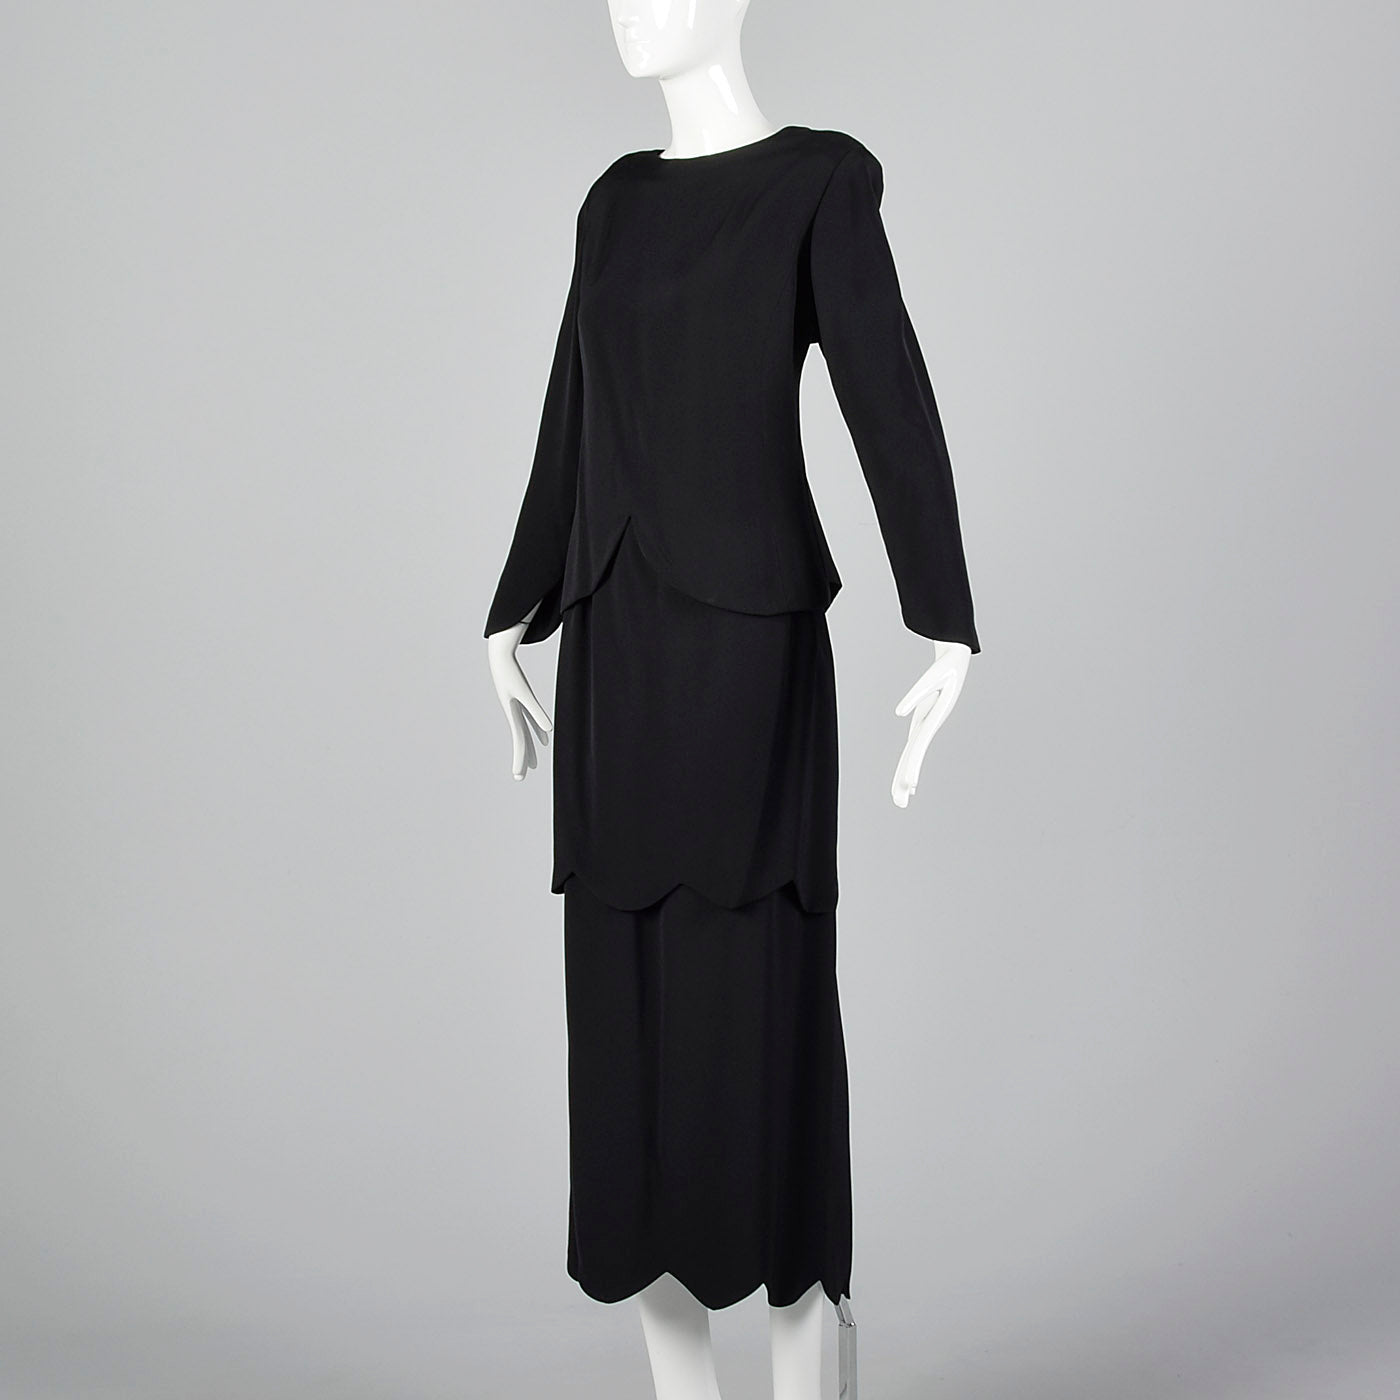 1980s Galanos Two Piece Black Dress with Great Layers